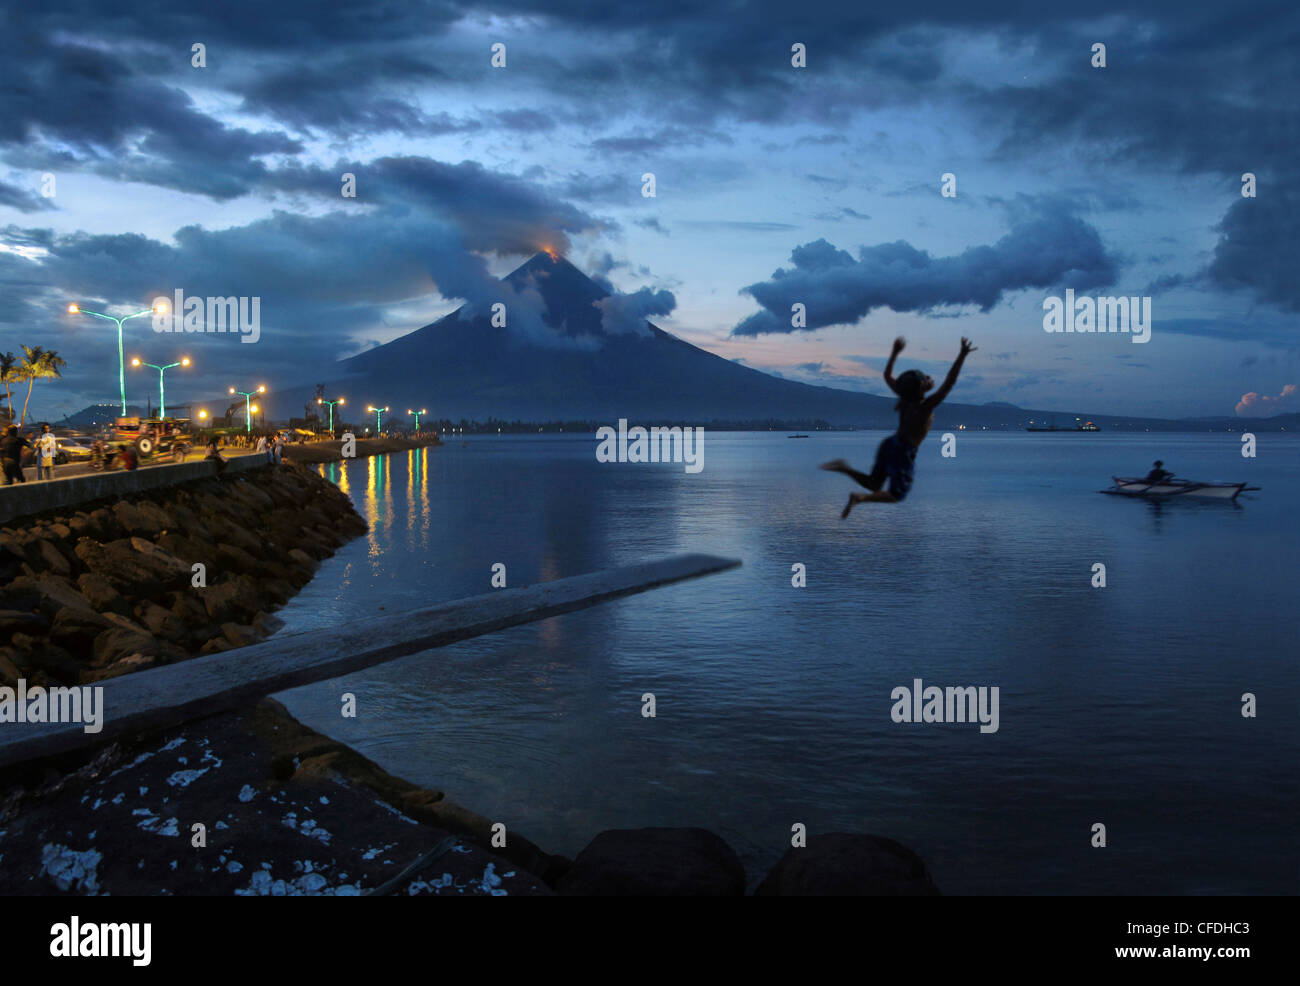 Boy jumping into the sea before a glowing Mayon Volcano, Legazpi City, Luzon Island, Philippines, Asia Stock Photo